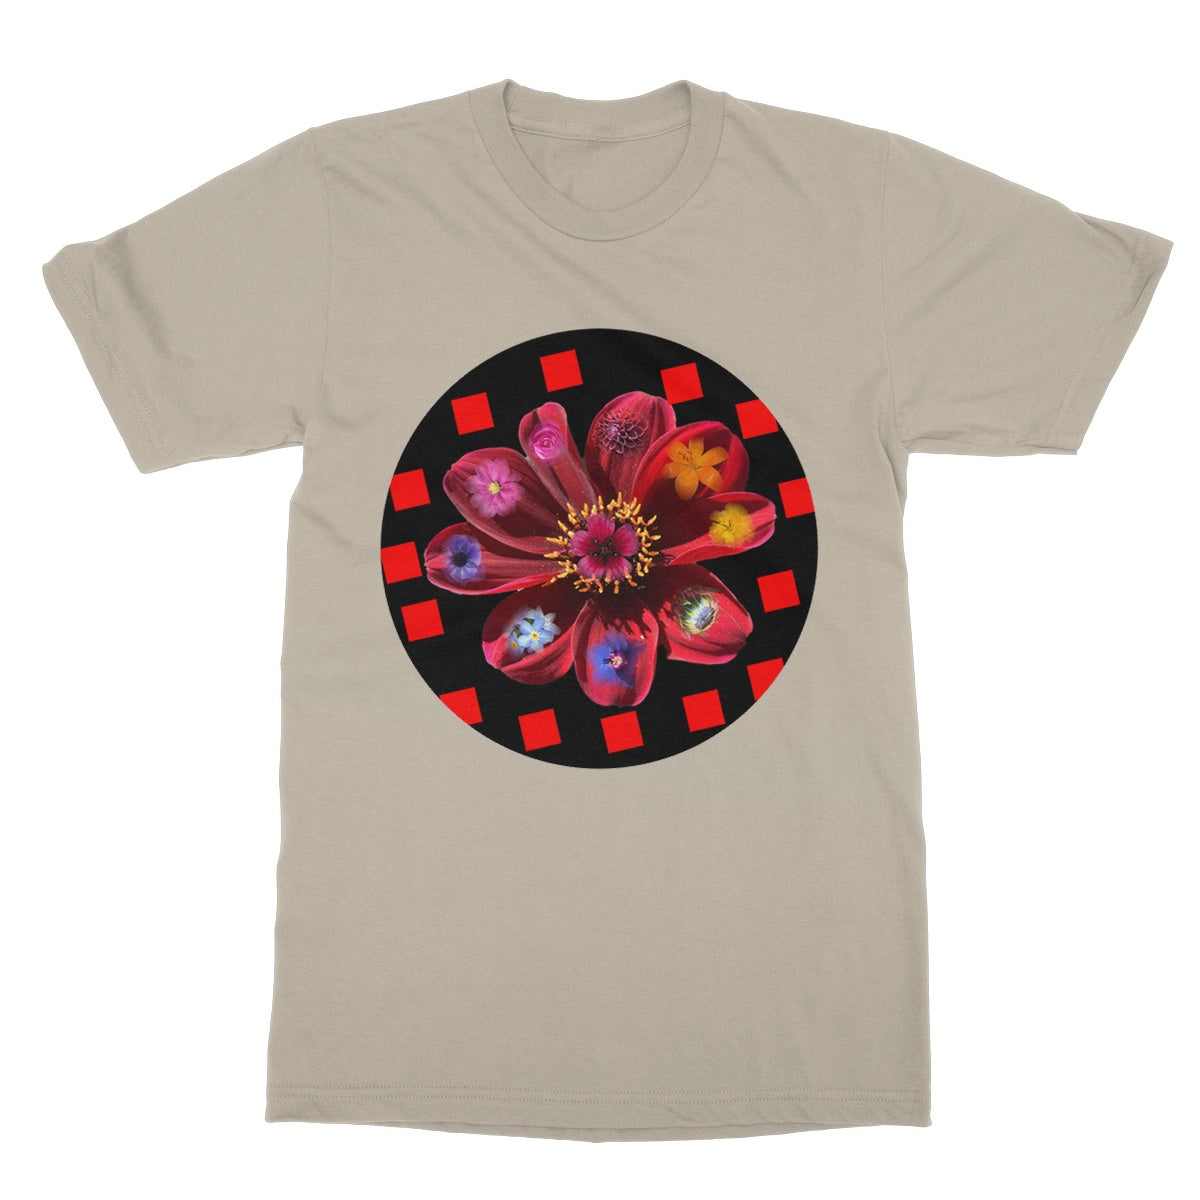 Neo's Red Rainbow Flower Softstyle T-Shirt